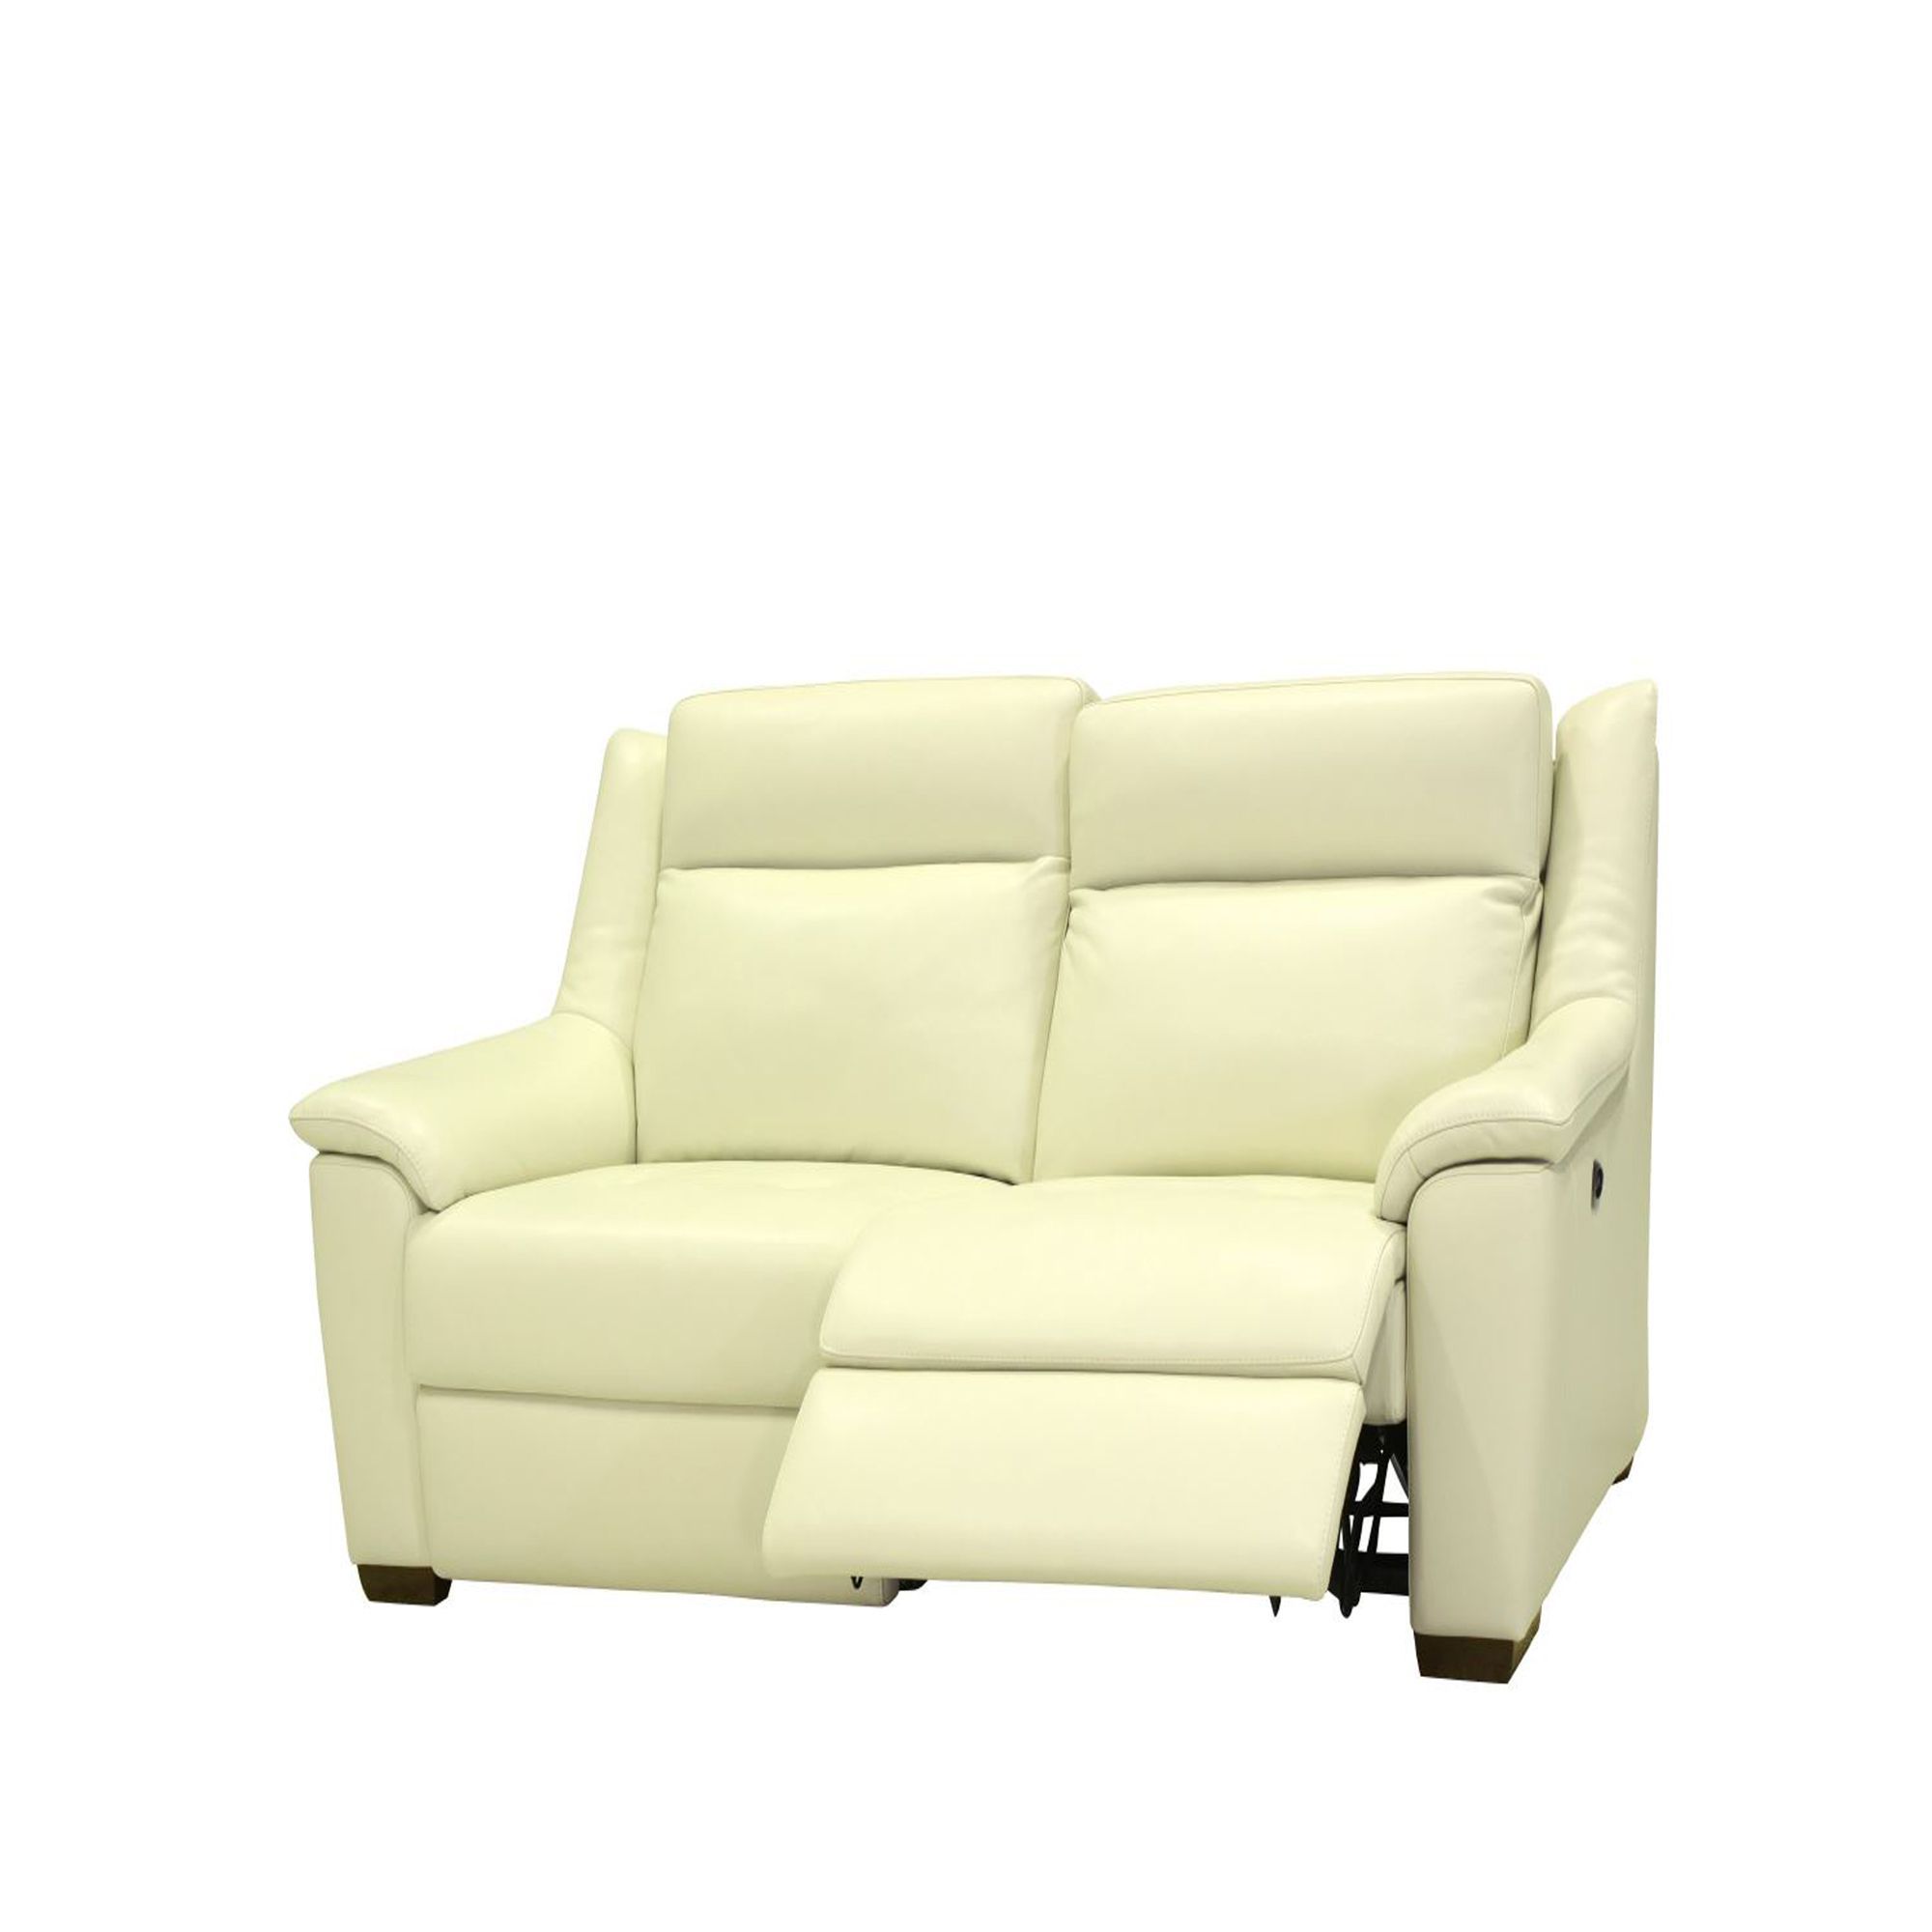 Cookes Collection Darwin 2 Seater Manual Recliner Sofa Living